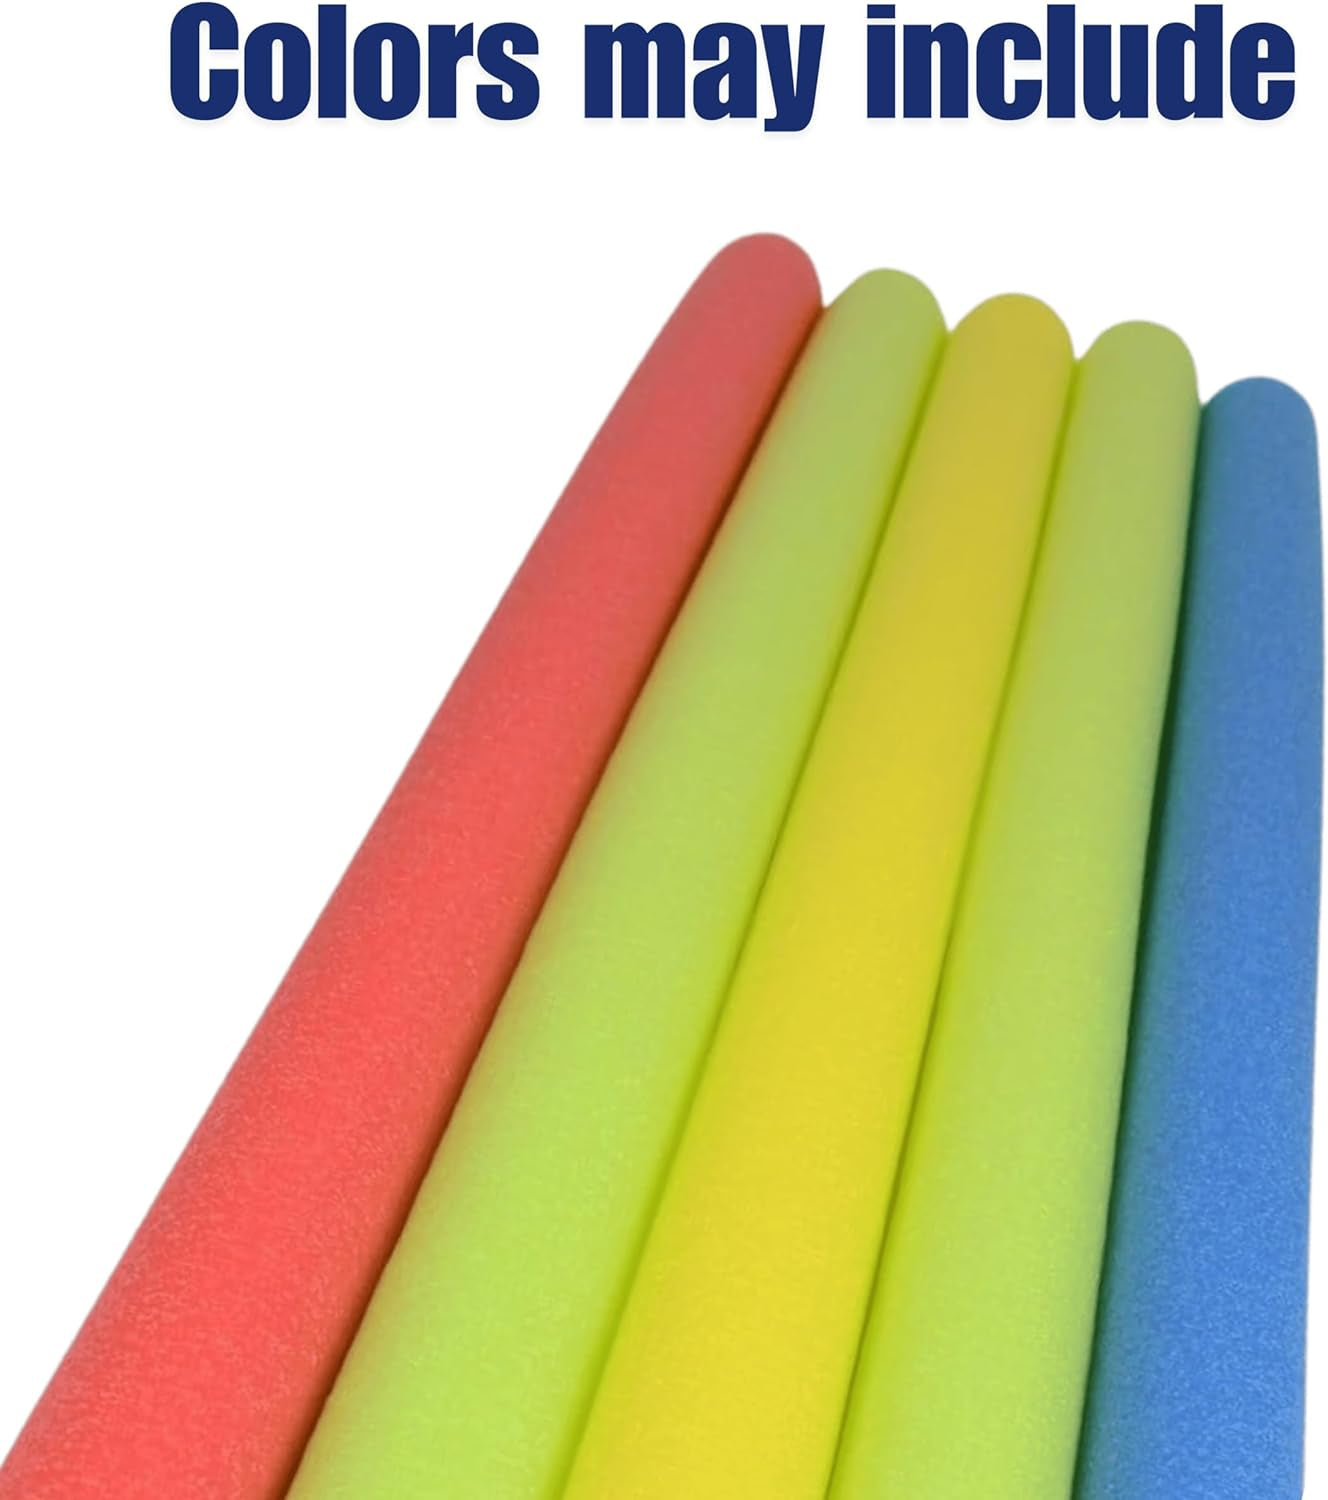 Swim Pool Noodles - Pack of 5 - Soft Foam Noodles for Swimming, Floating, and Water Exercises - 52 Inch - Multicolor